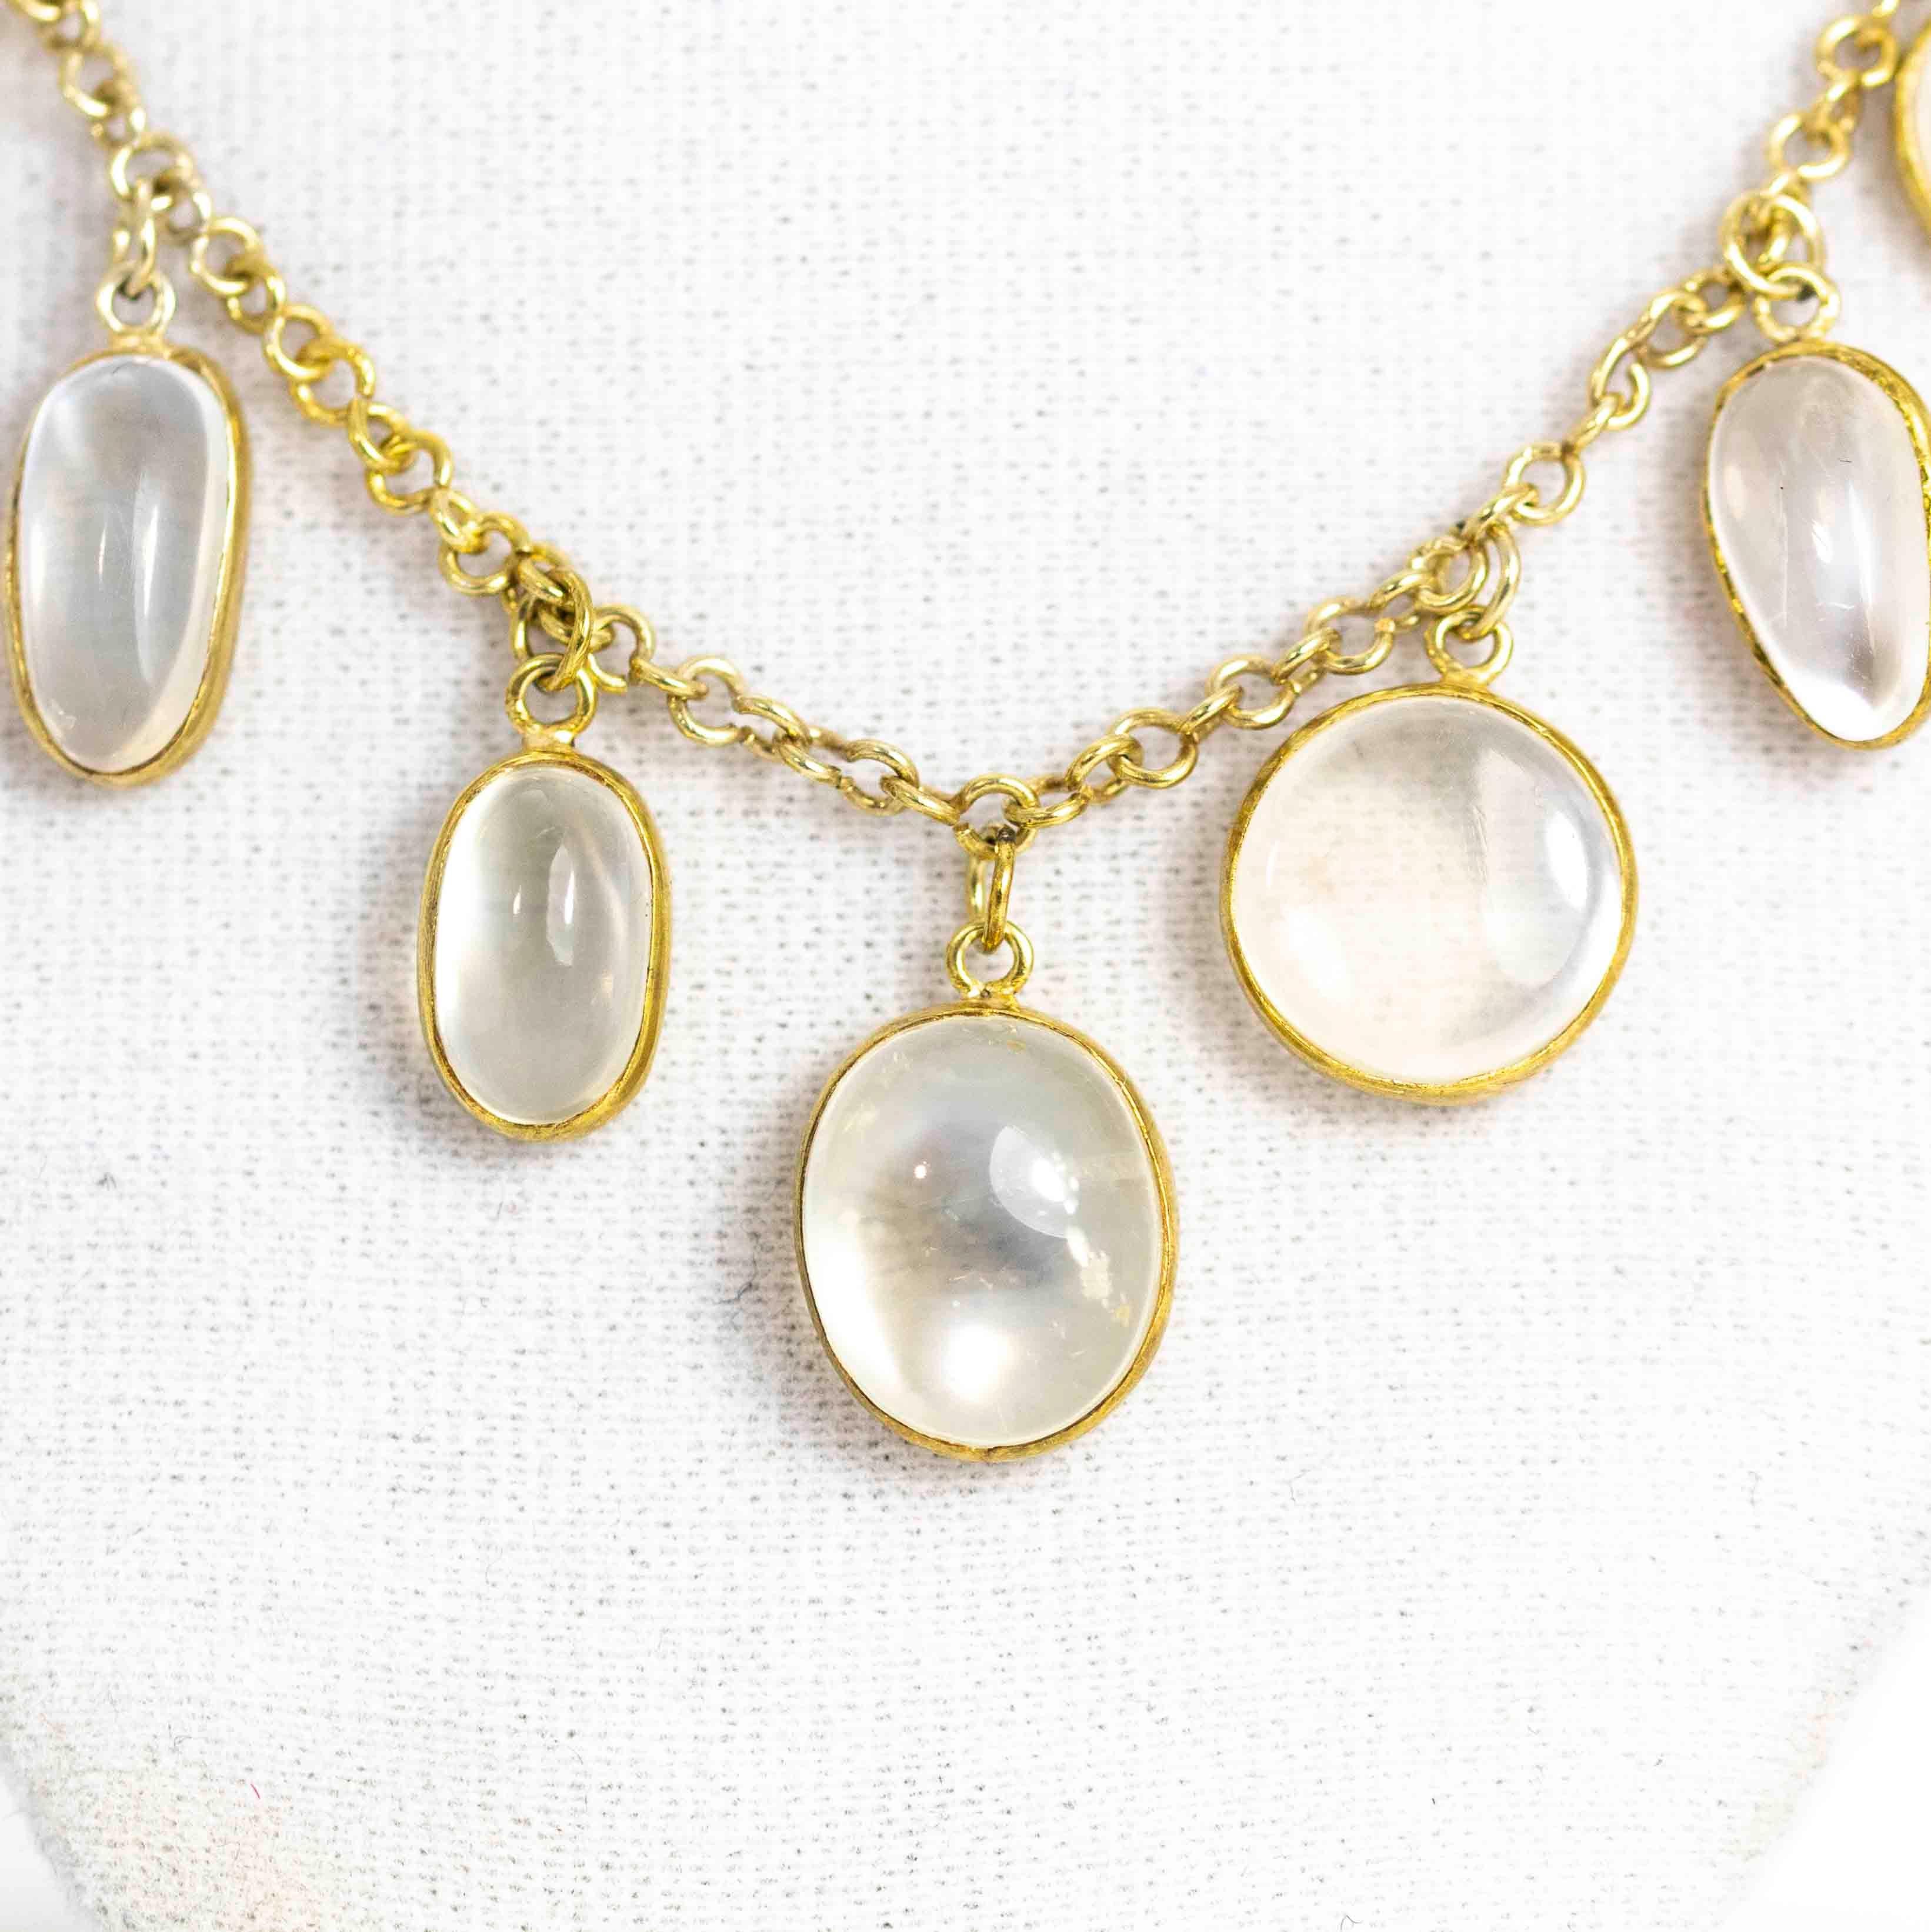 A superb vintage necklace fully set with beautiful graduated moonstone cabochon drops. Modelled in gilded silver with barrel-torpedo clasp clasp.

Length: 42cm